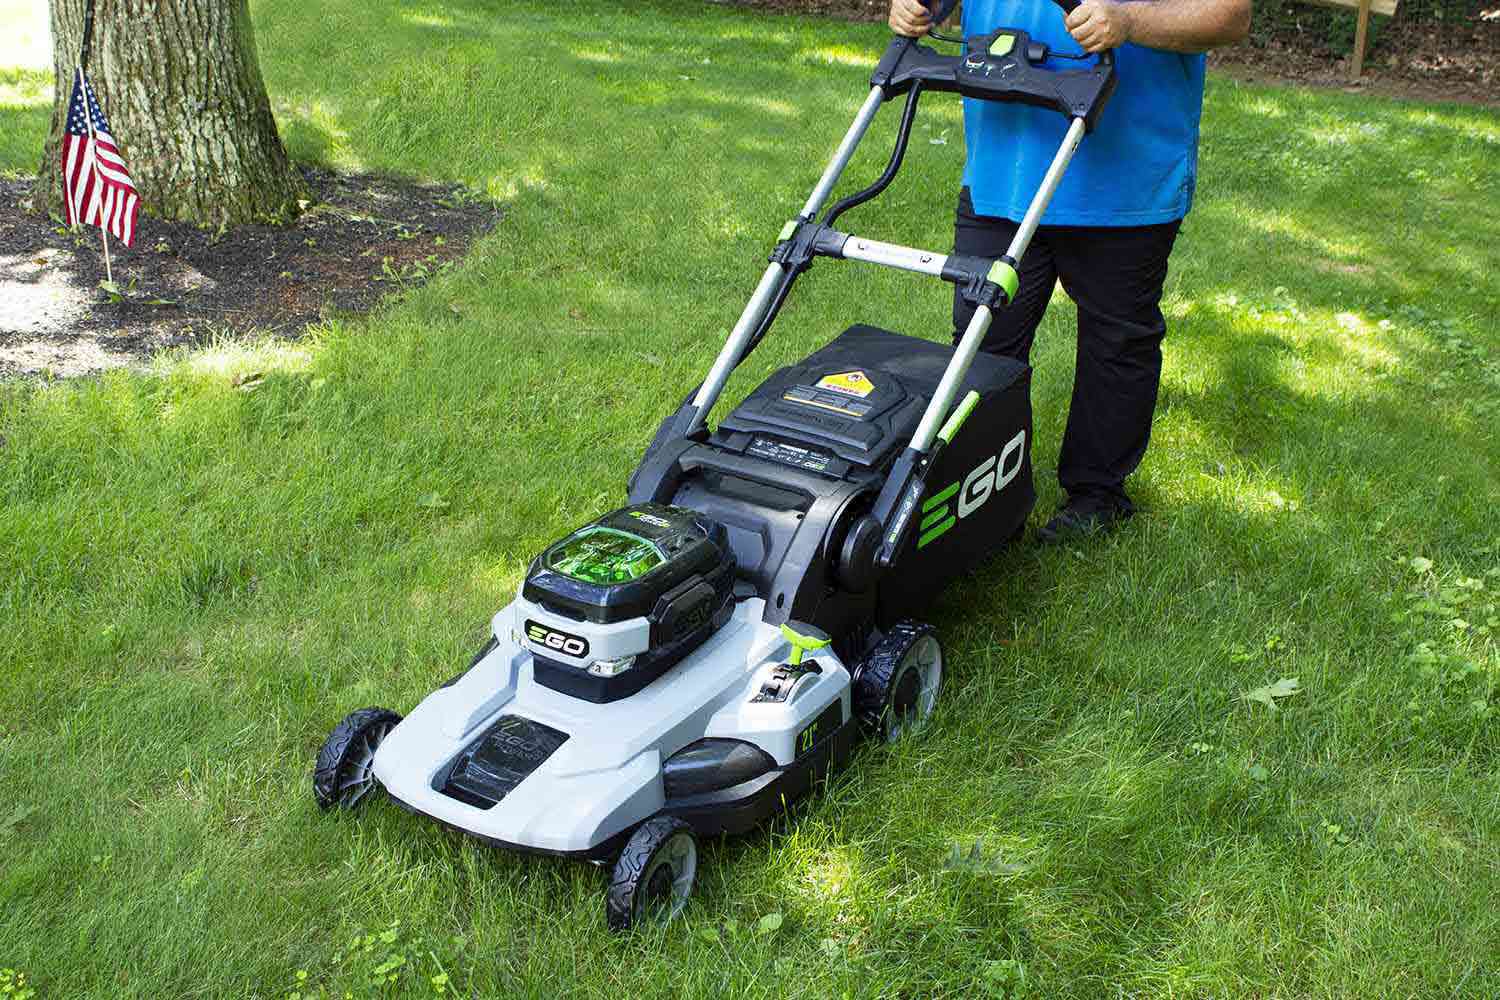 How to Make a Push Mower More Powerful